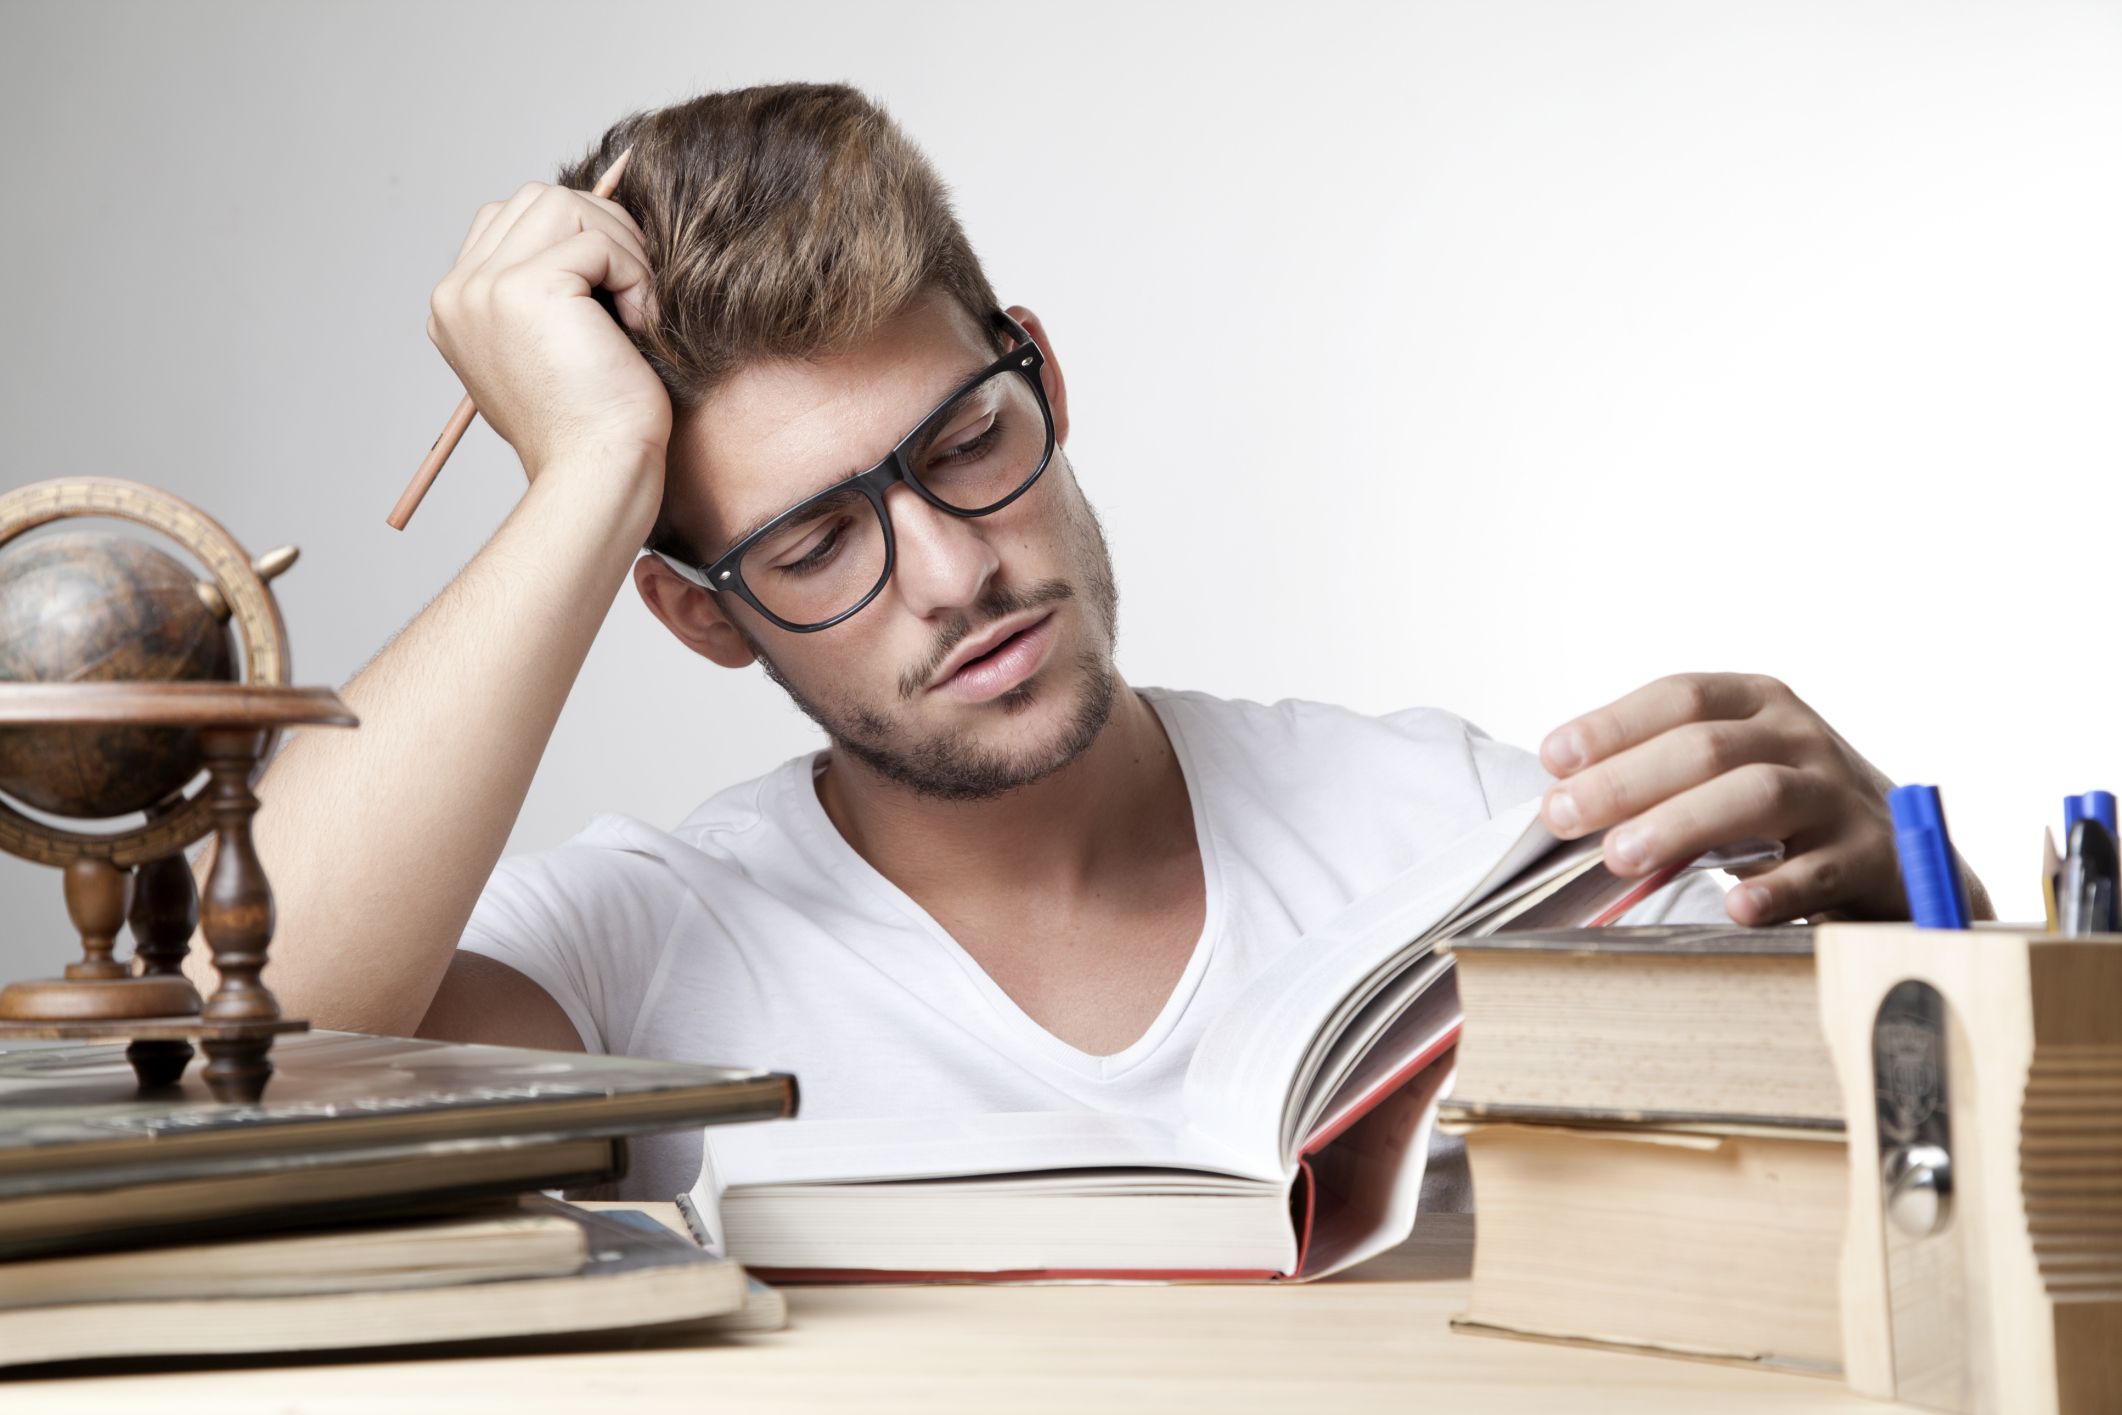 6 Steps for Self-Discipline When You Study